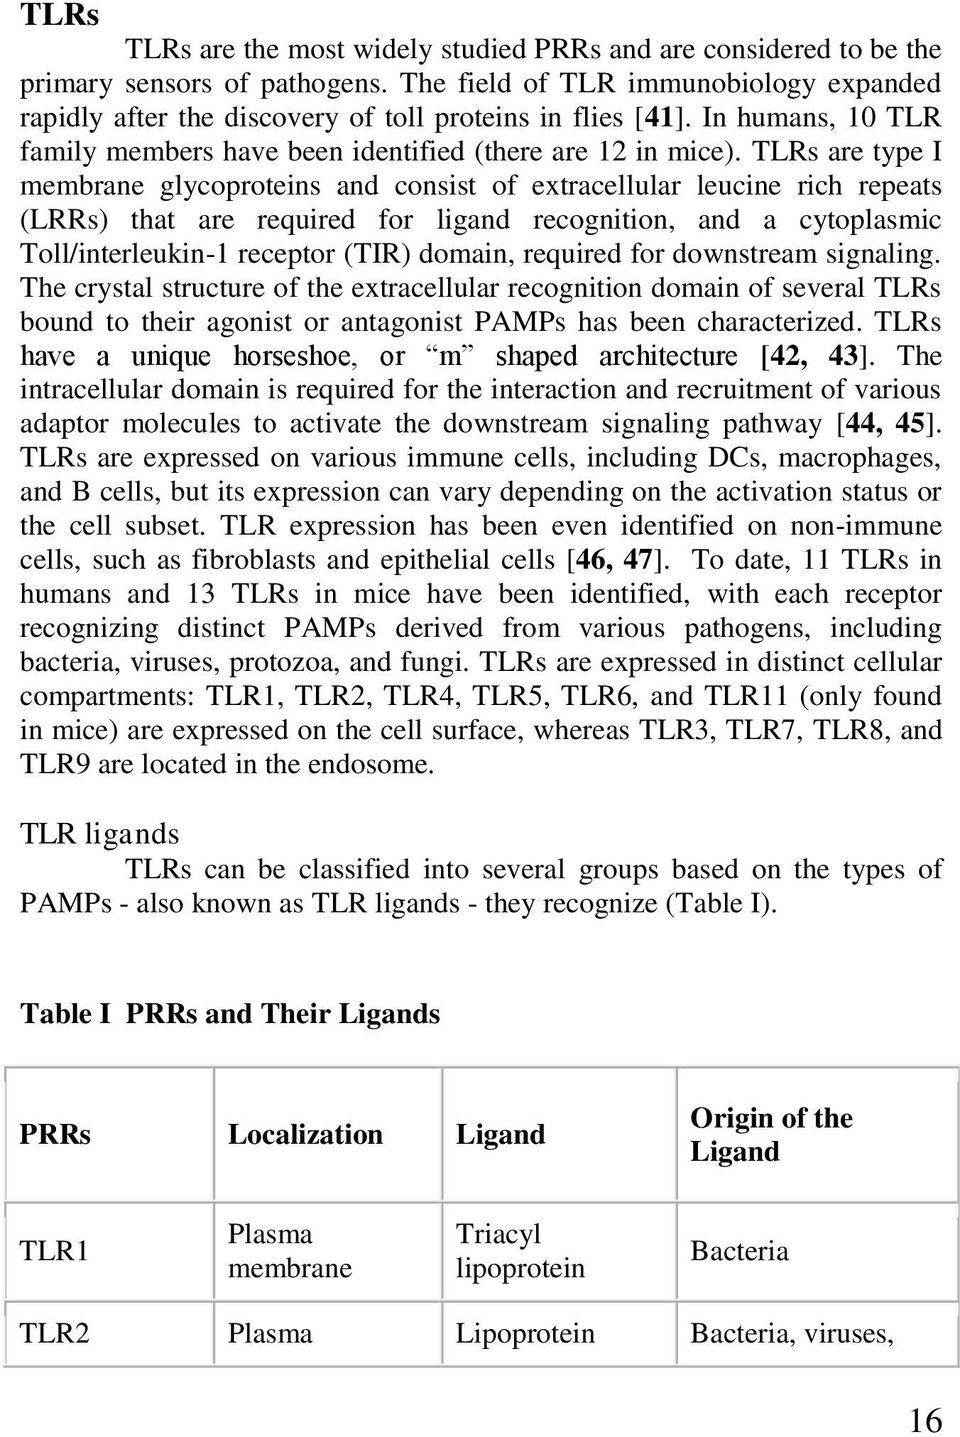 TLRs are type I membrane glycoproteins and consist of extracellular leucine rich repeats (LRRs) that are required for ligand recognition, and a cytoplasmic Toll/interleukin-1 receptor (TIR) domain,